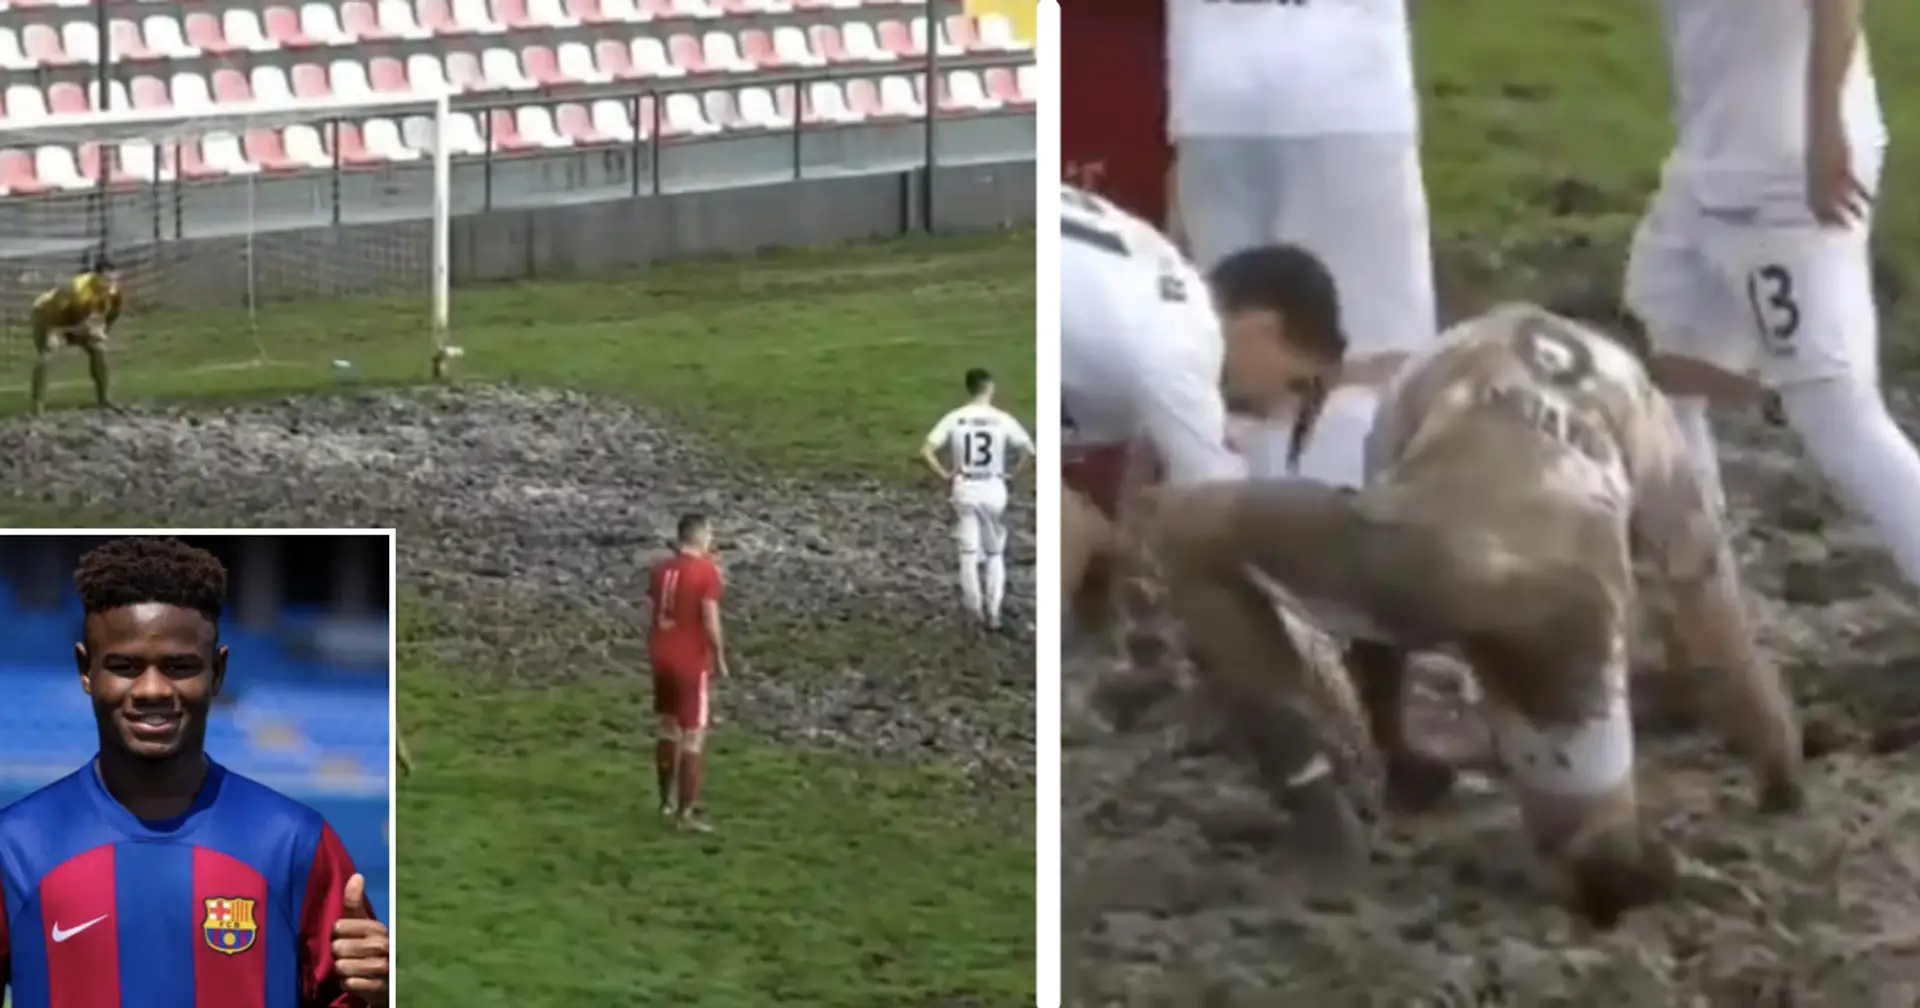 Player takes penalty kick in huge mud puddle – Mikayil Faye played in that league last year